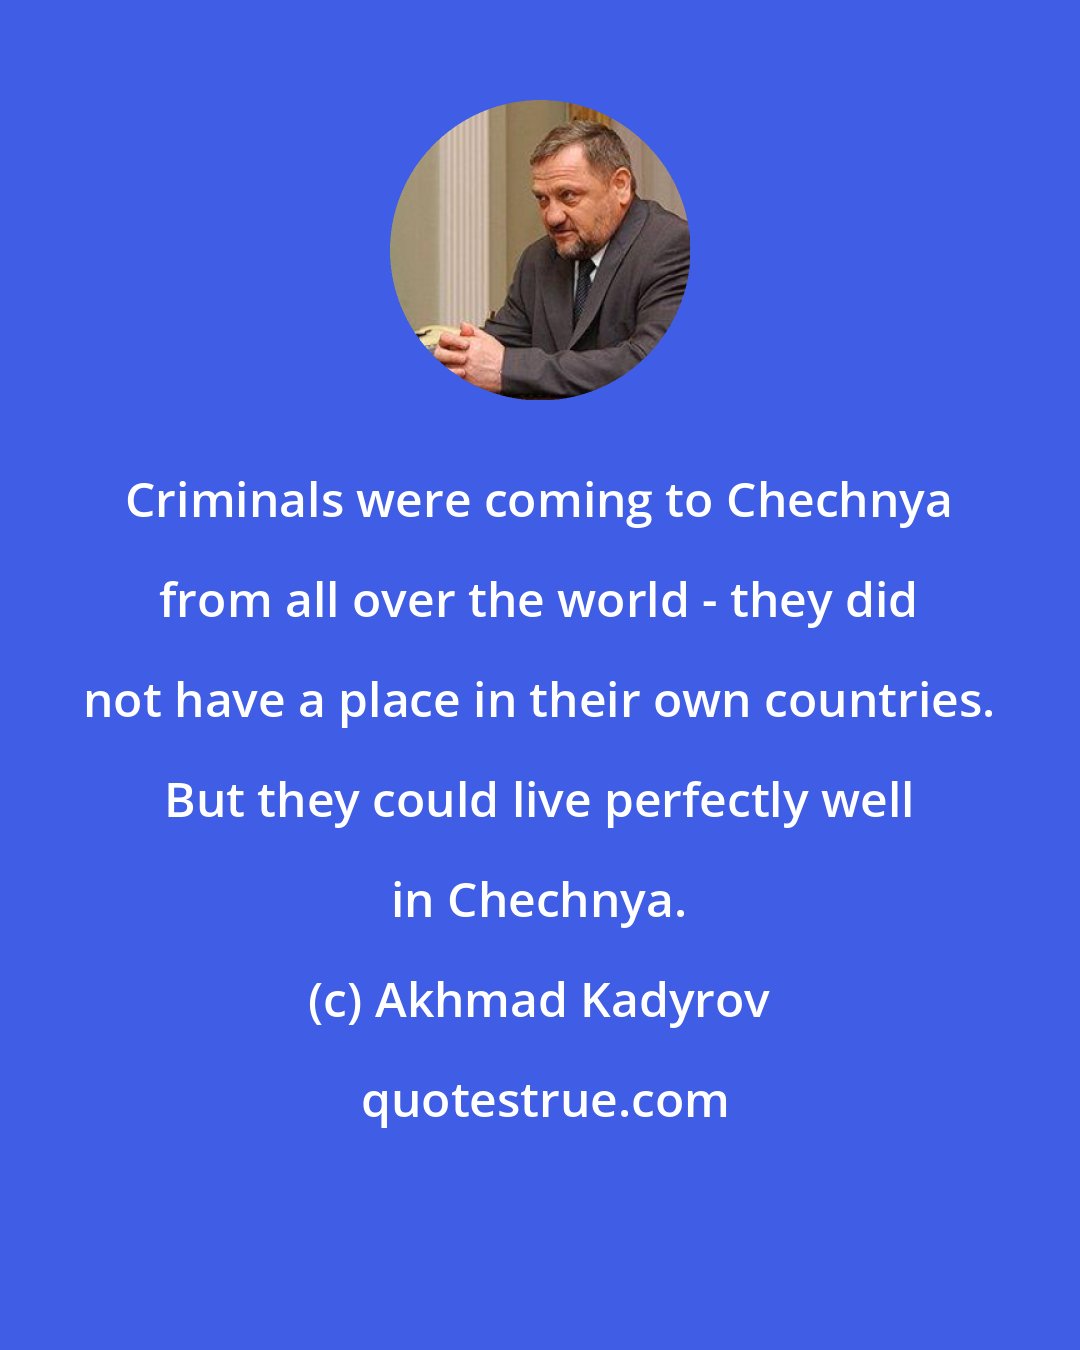 Akhmad Kadyrov: Criminals were coming to Chechnya from all over the world - they did not have a place in their own countries. But they could live perfectly well in Chechnya.